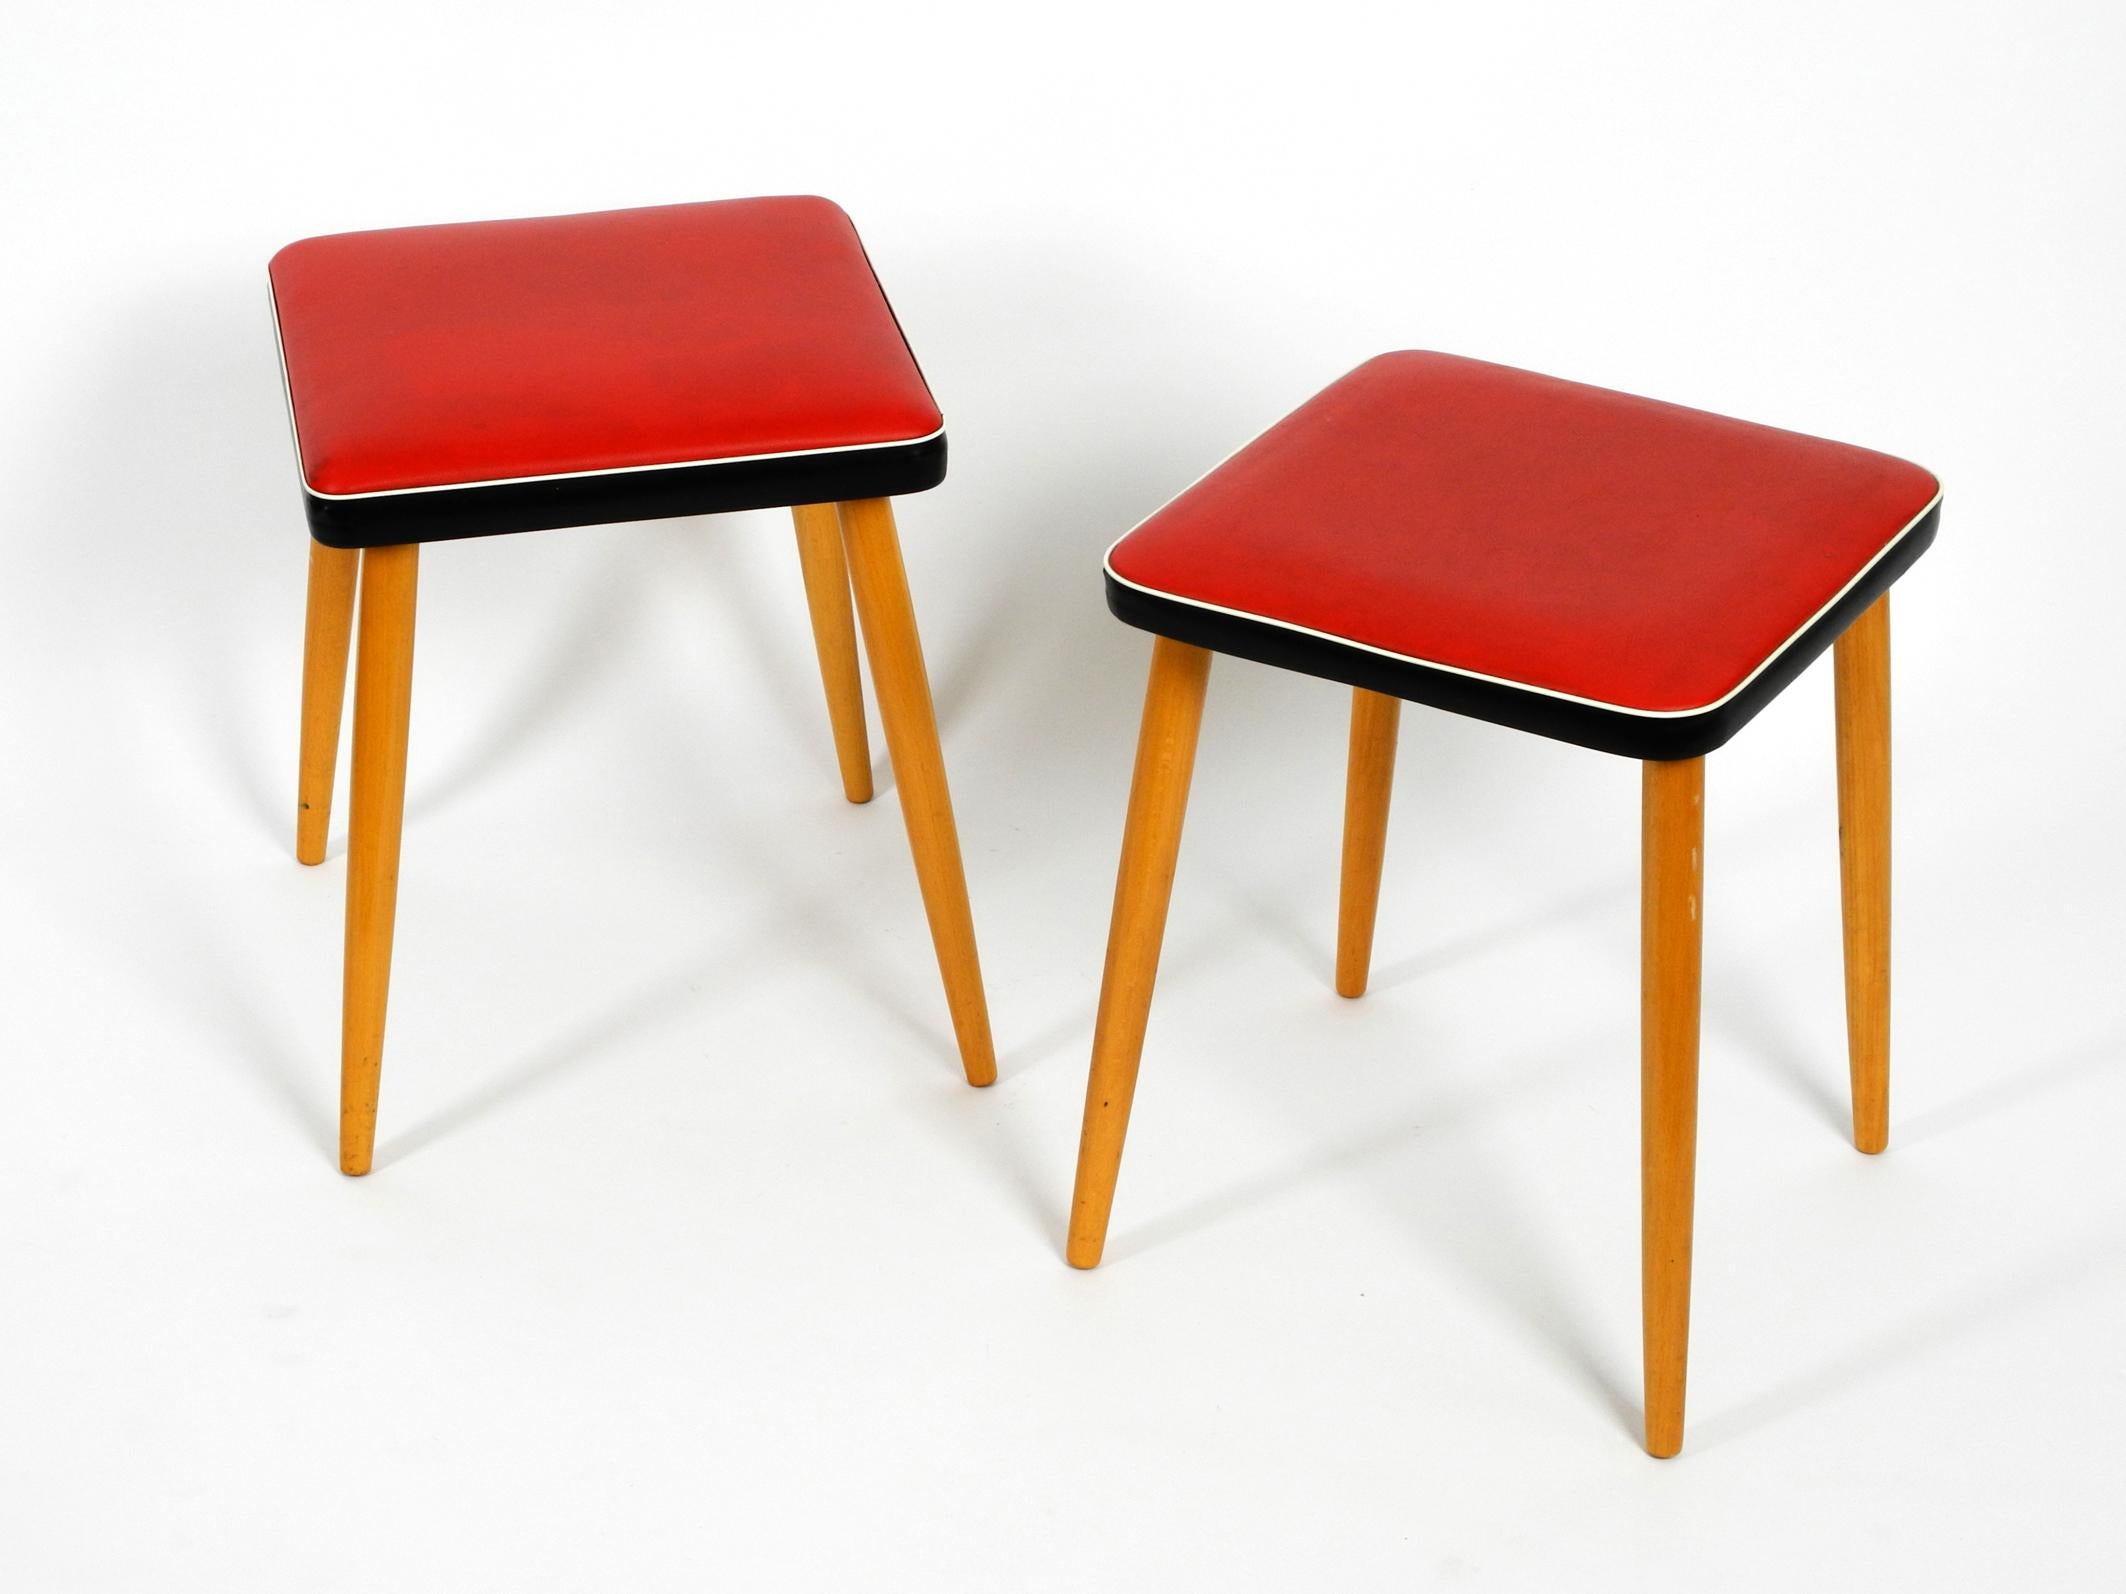 Pair of very nice four-legged wooden stools with red faux leather. Almost new condition. 
Probably never used and barely no traces of wear, light traces of storage.
The seats are very clean and without damages. No cracks. 
The clear lacquered